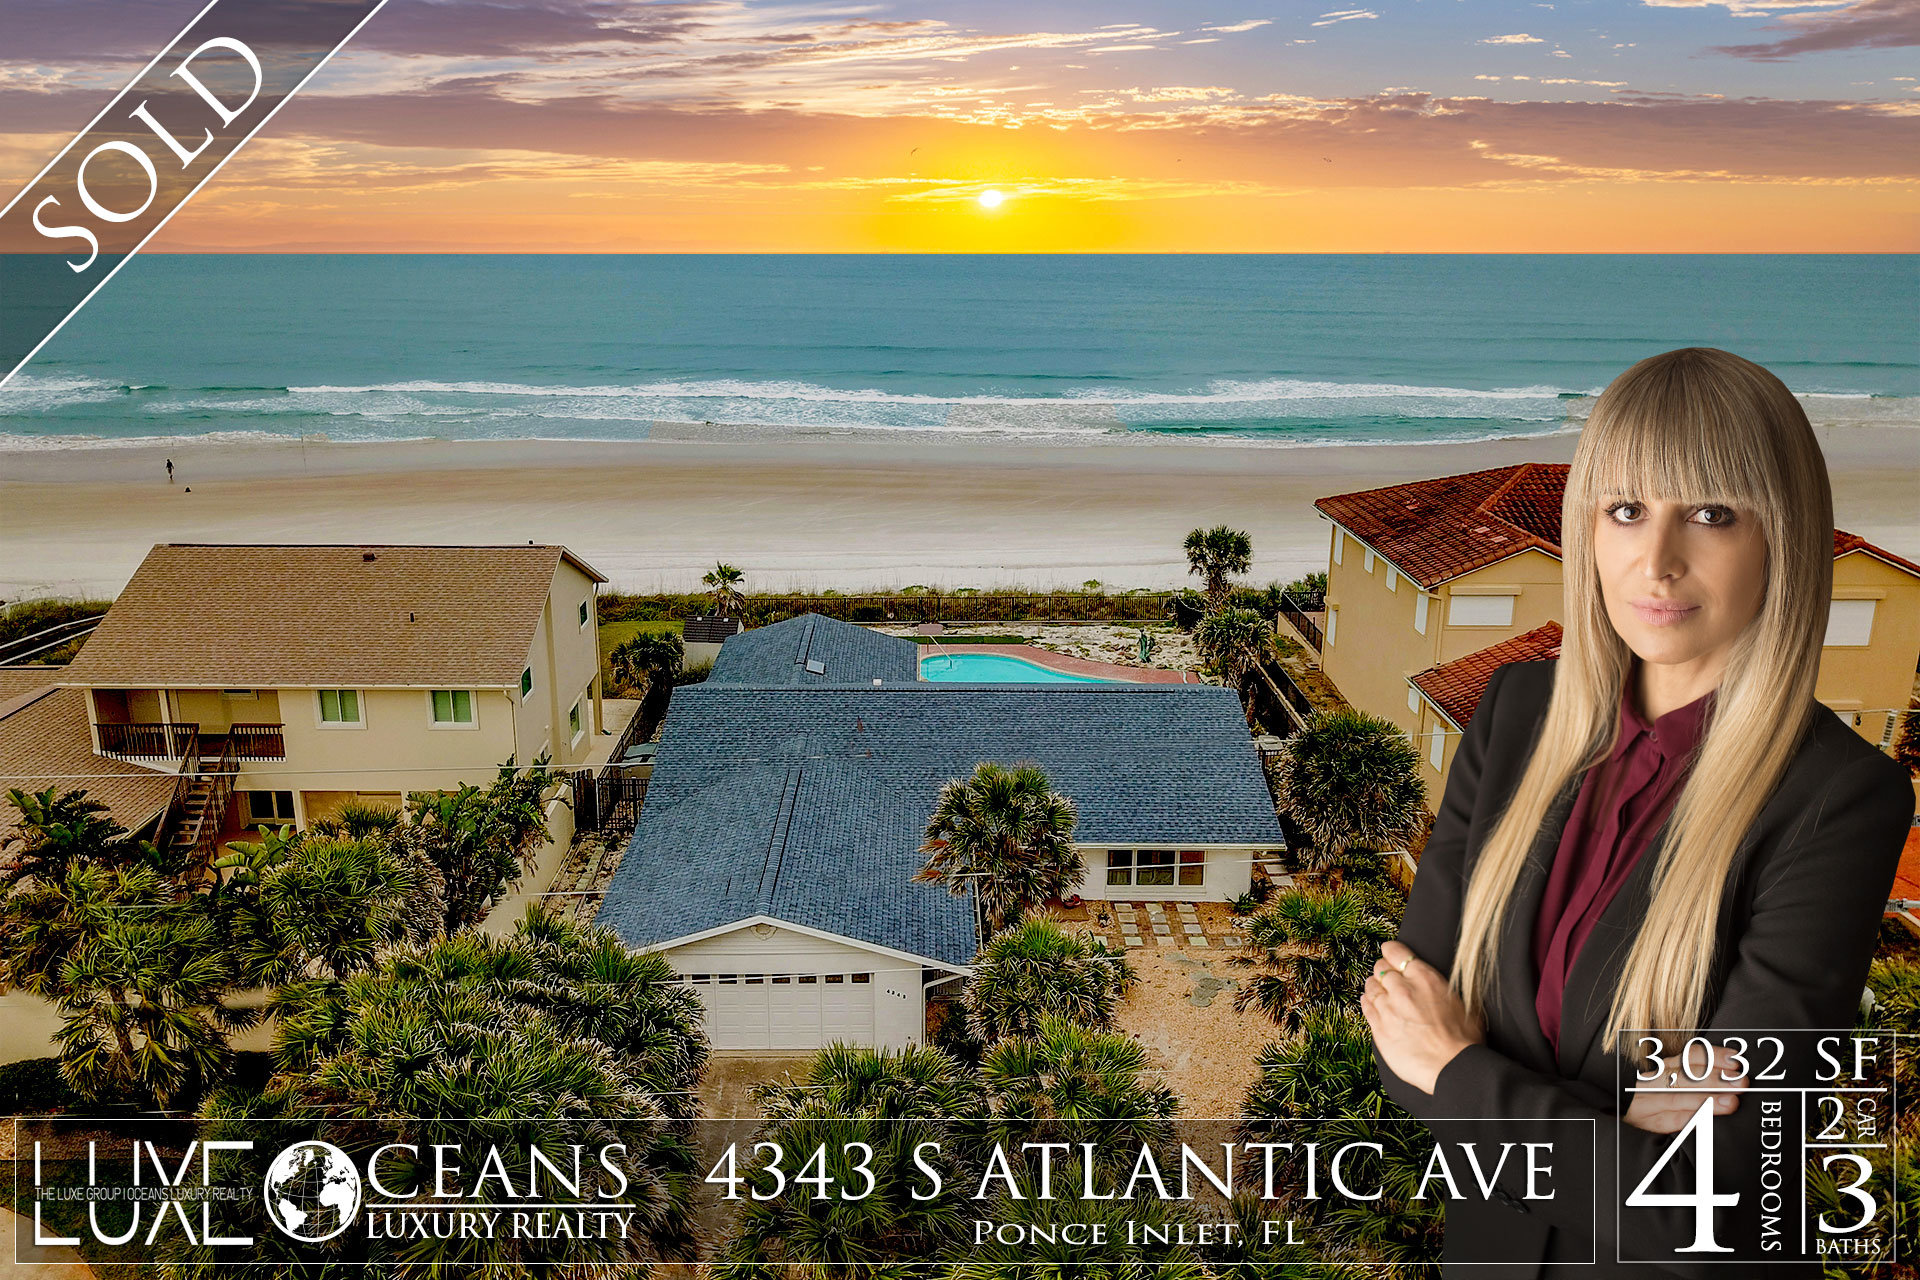 Ponce Inlet Oceanfront Homes - Sold - 4343 S Atlantic Ave Waterfront Homes For Sale